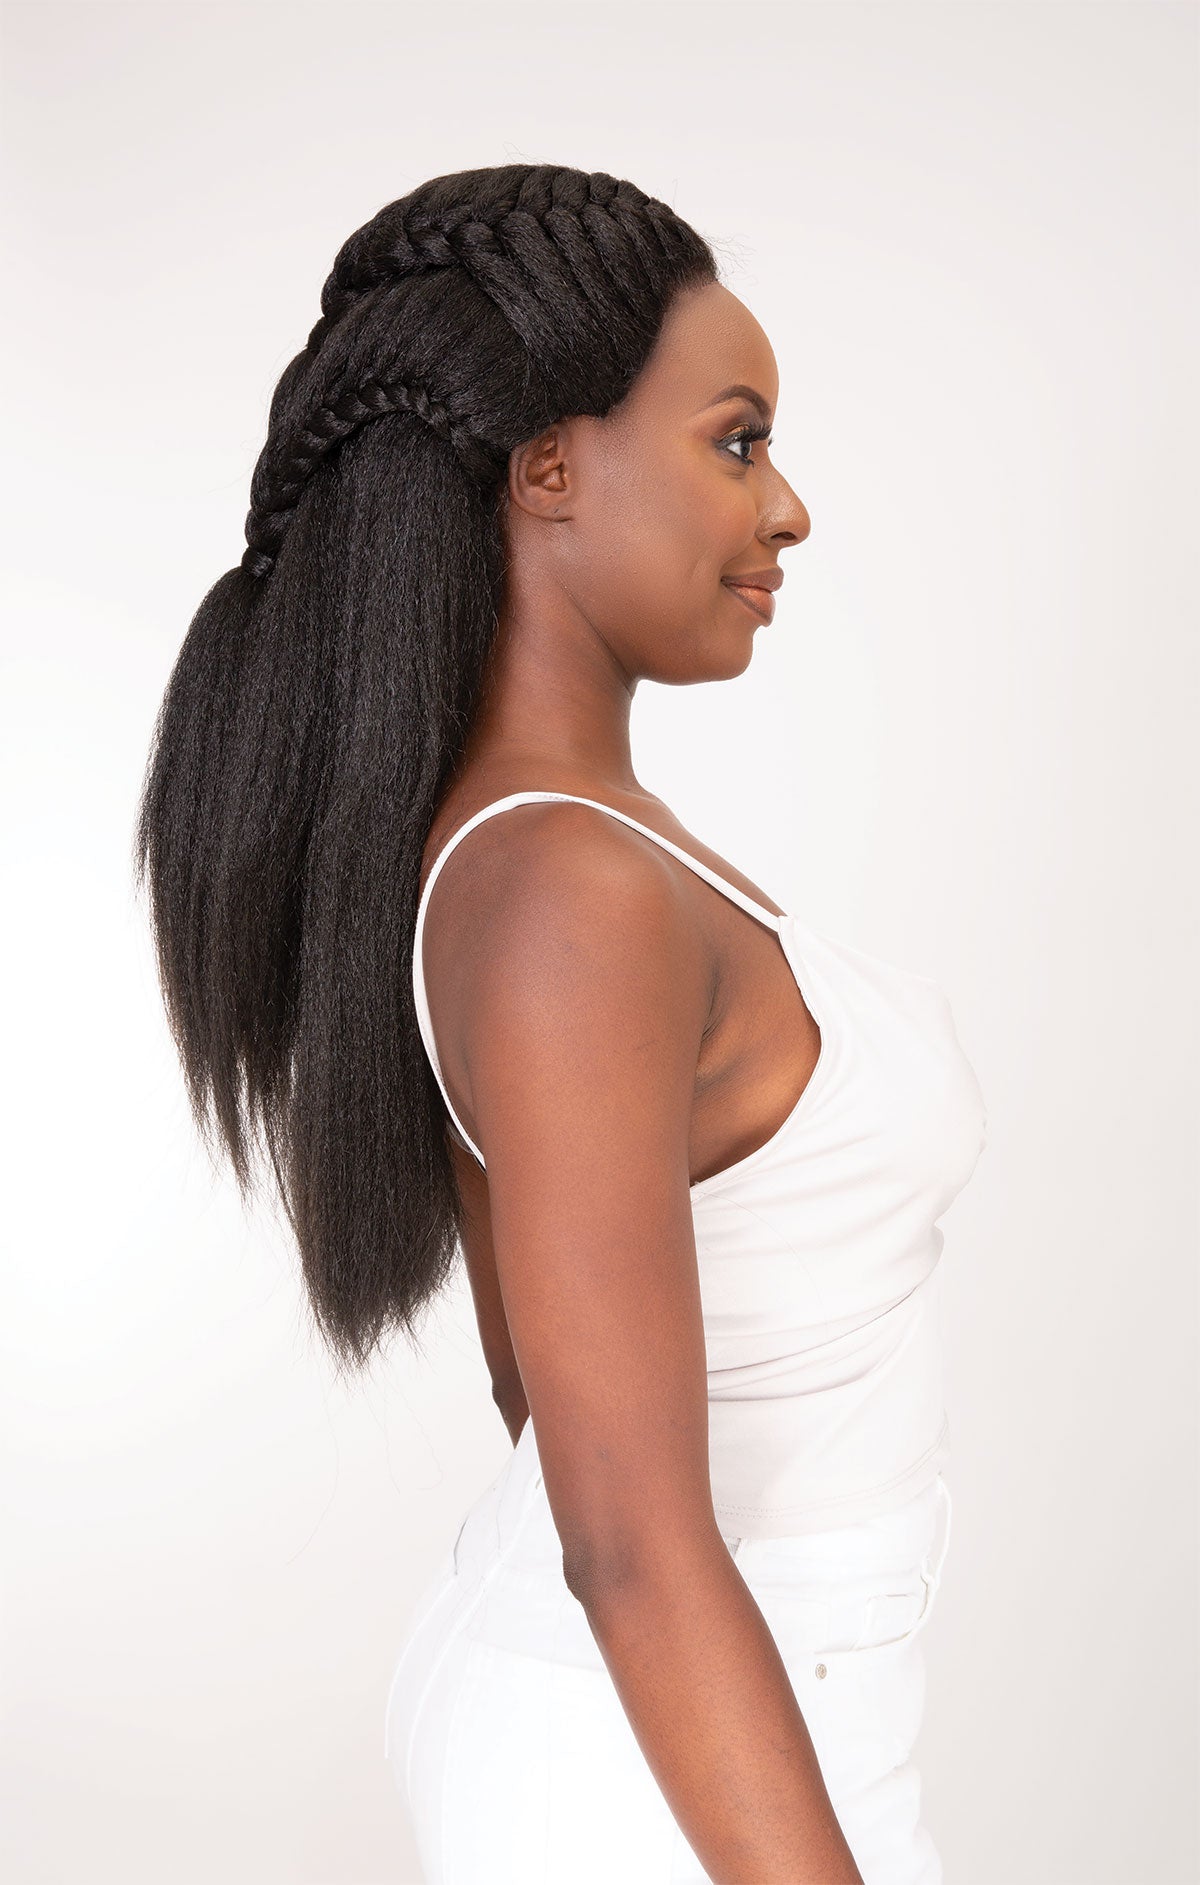 JANET COLLECTIONS - NATURAL ME LACE BRAID LULU WIG